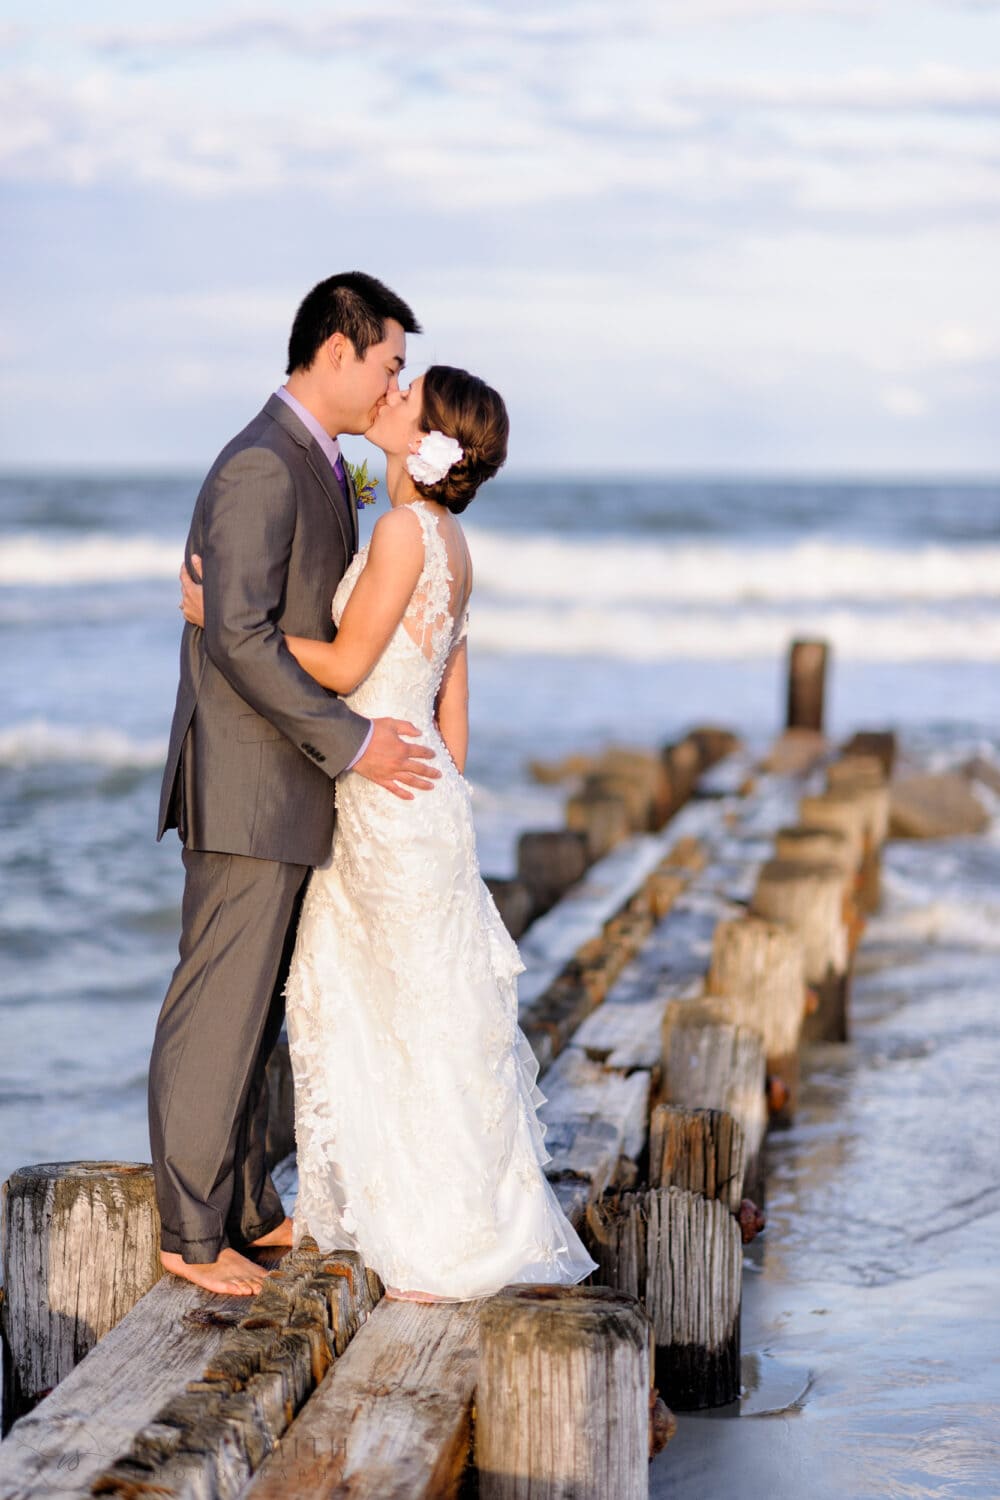 Couple kissing on a beach jetty - Murrells Inlet